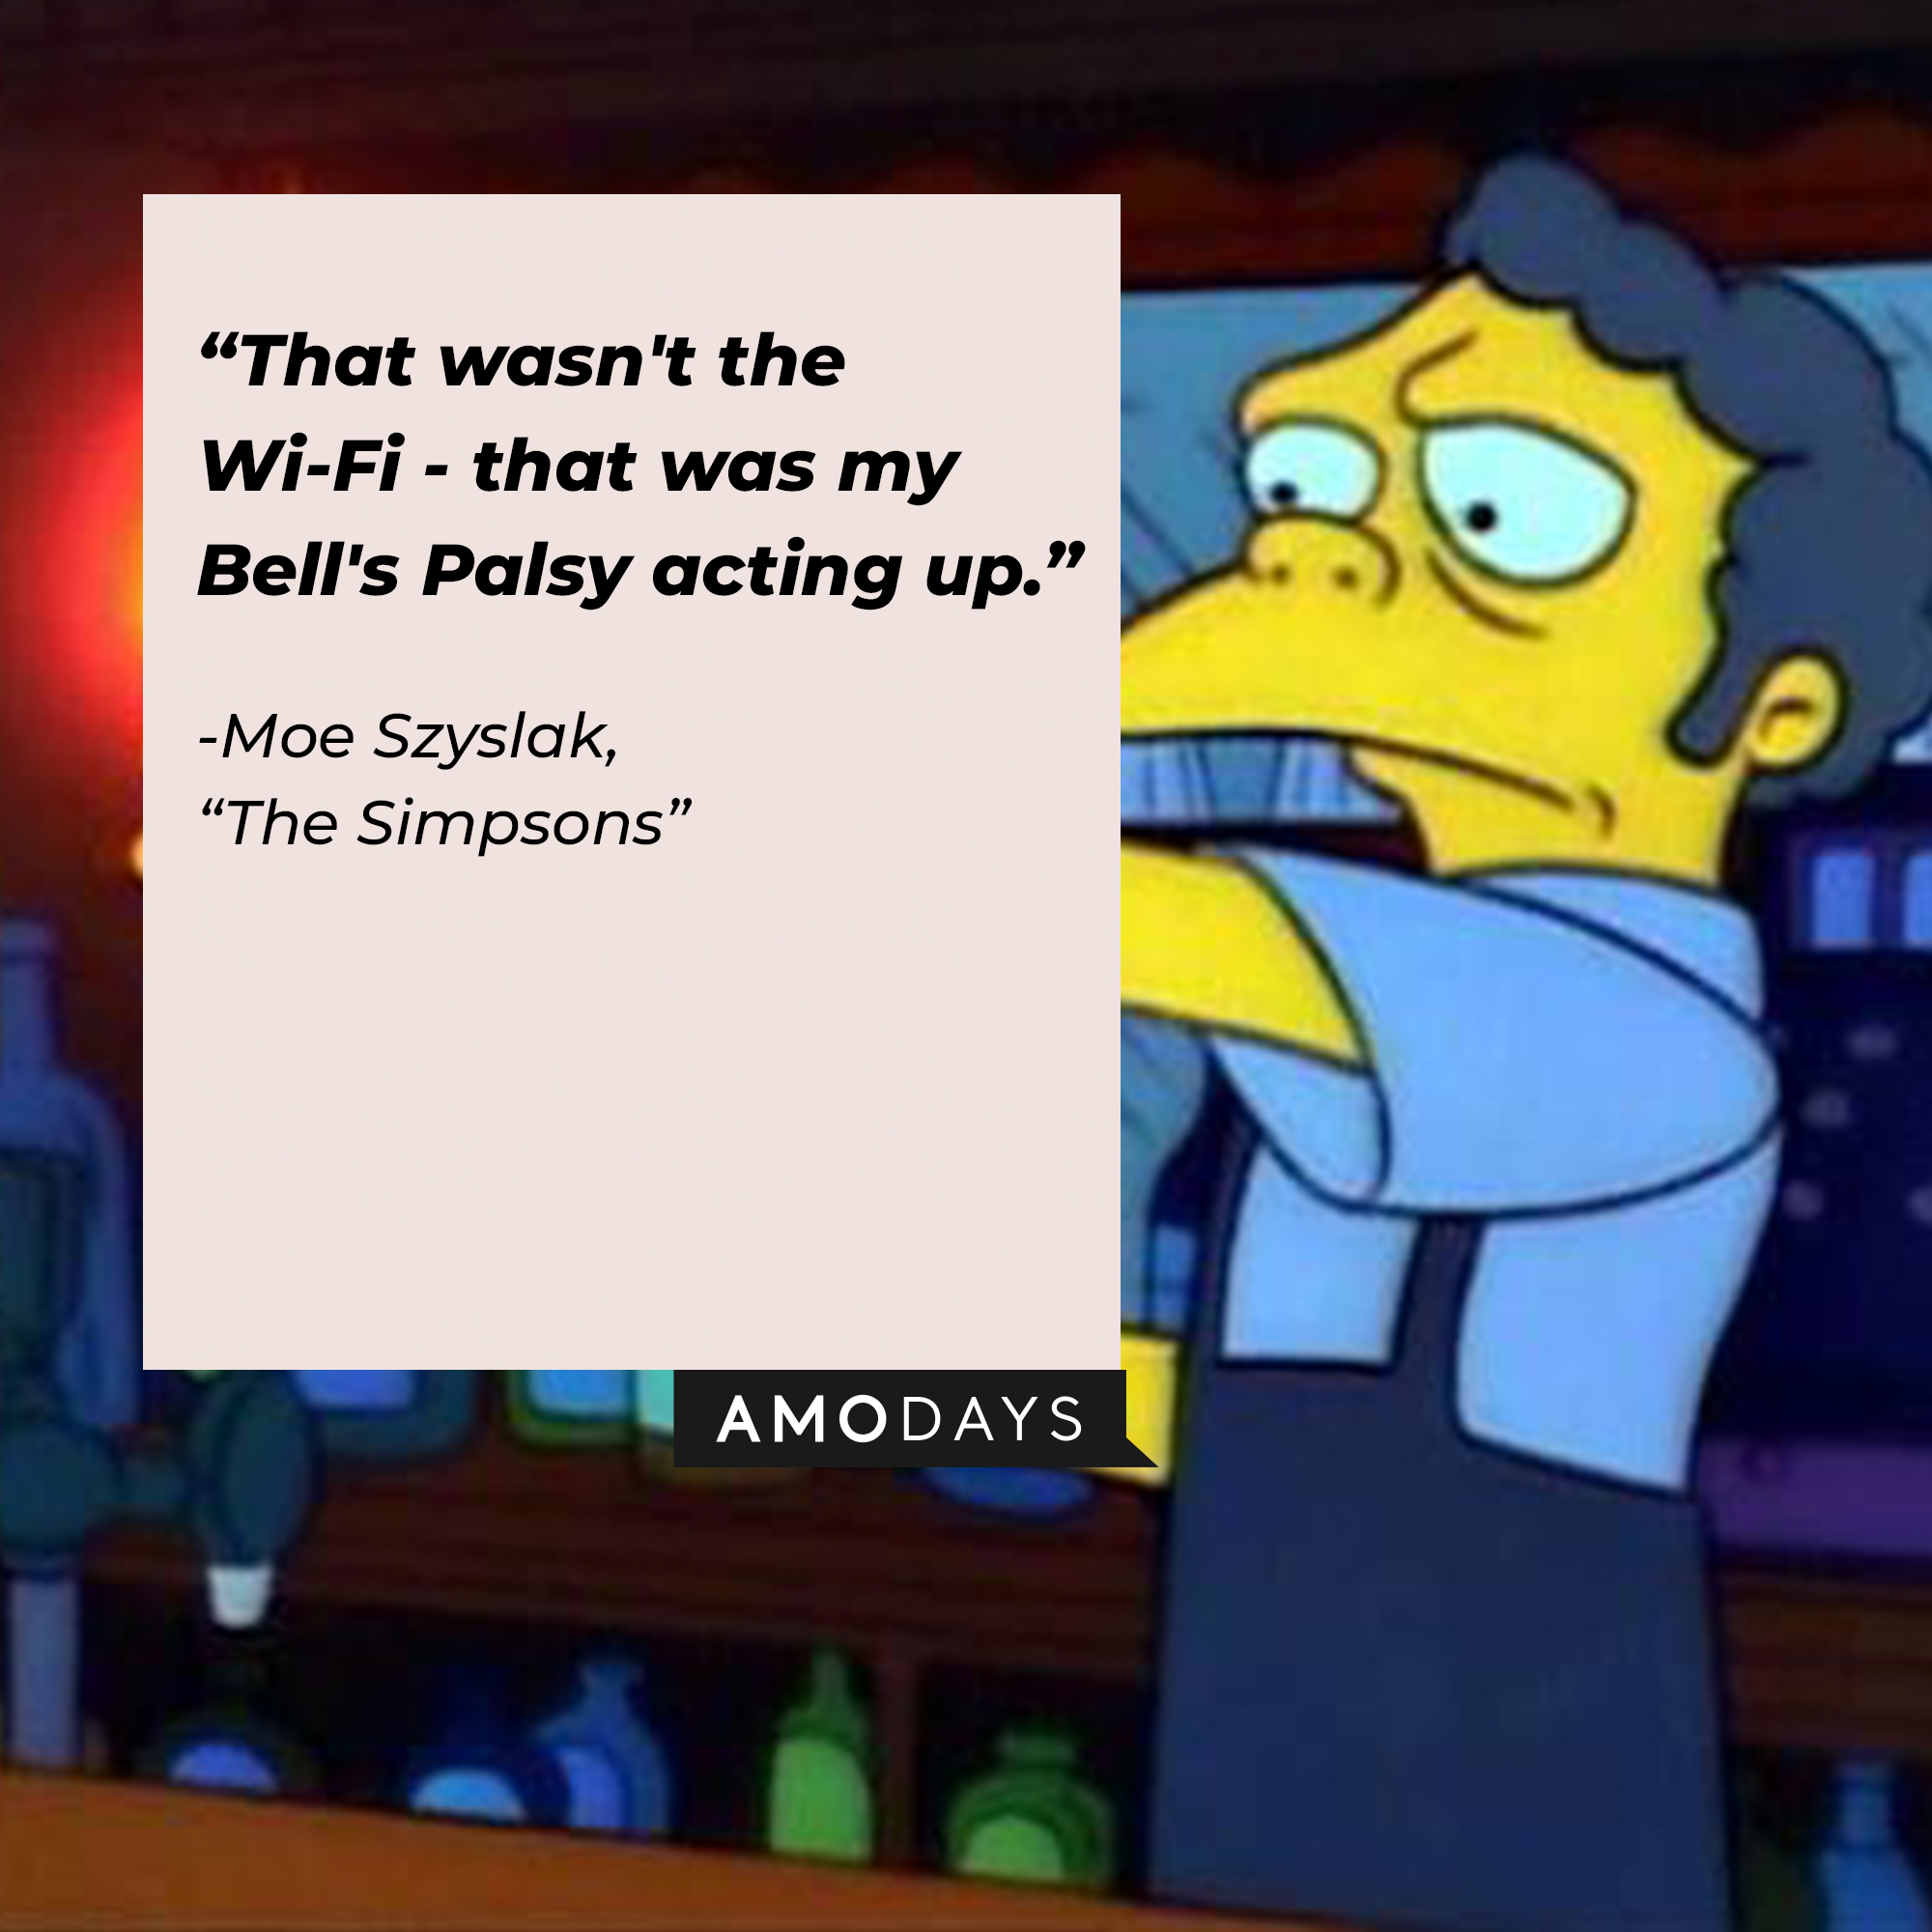 Image of Moe Szyslak with his quote from "The Simpsons:" "That wasn't the Wi-Fi - that was my Bell's Palsy acting up." | Source: Facebook.com/TheSimpsons